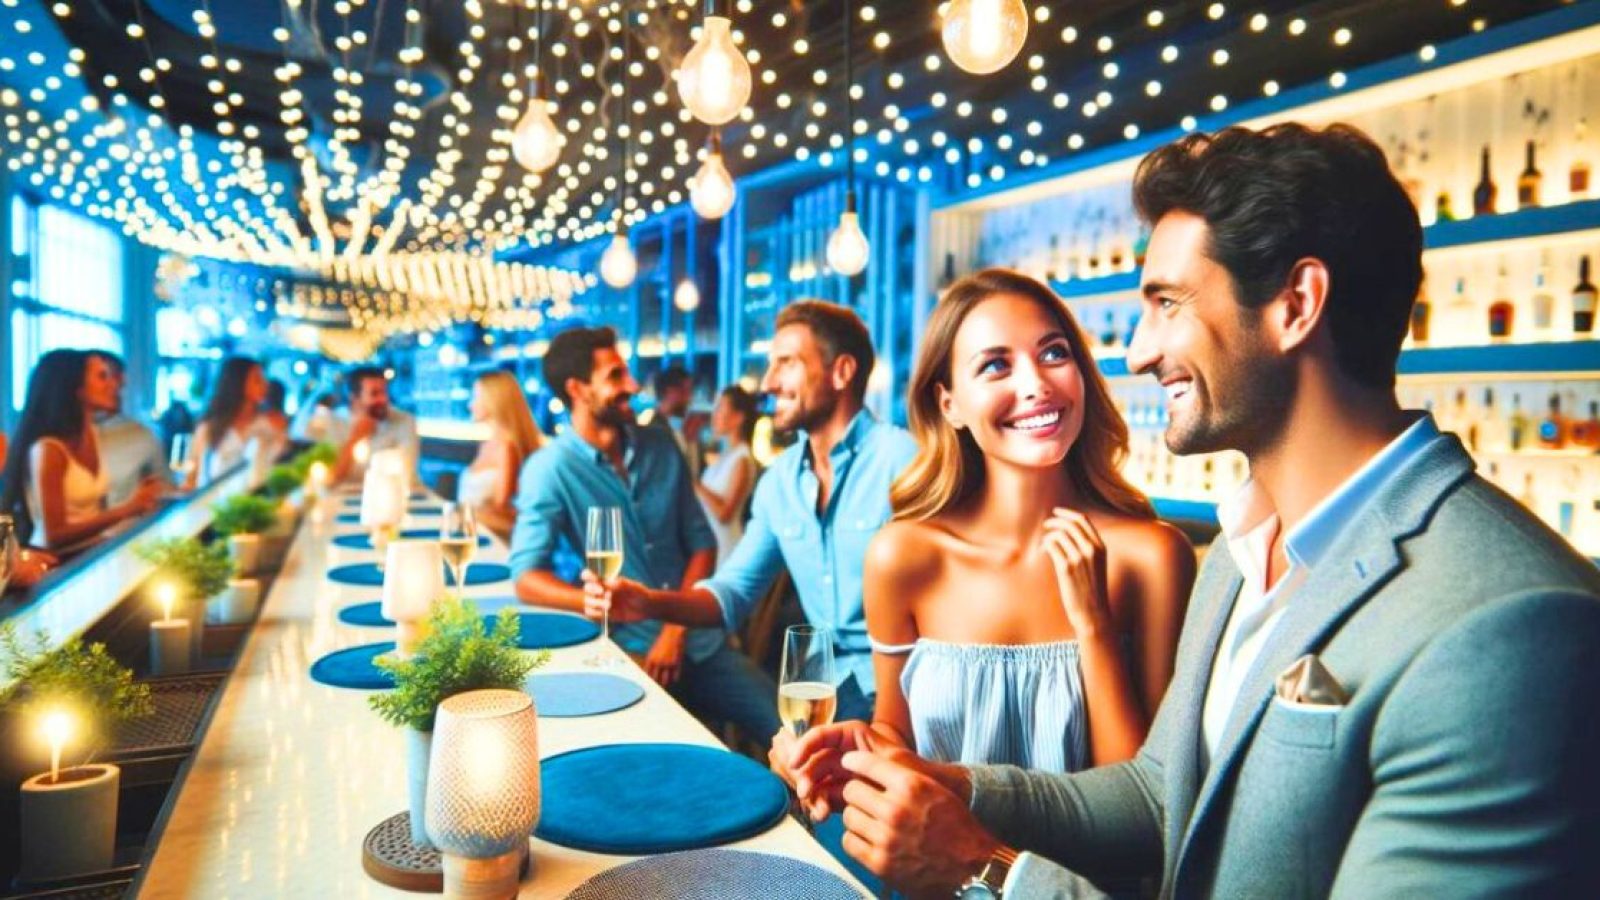 men and women flirting at speed dating event at a bar